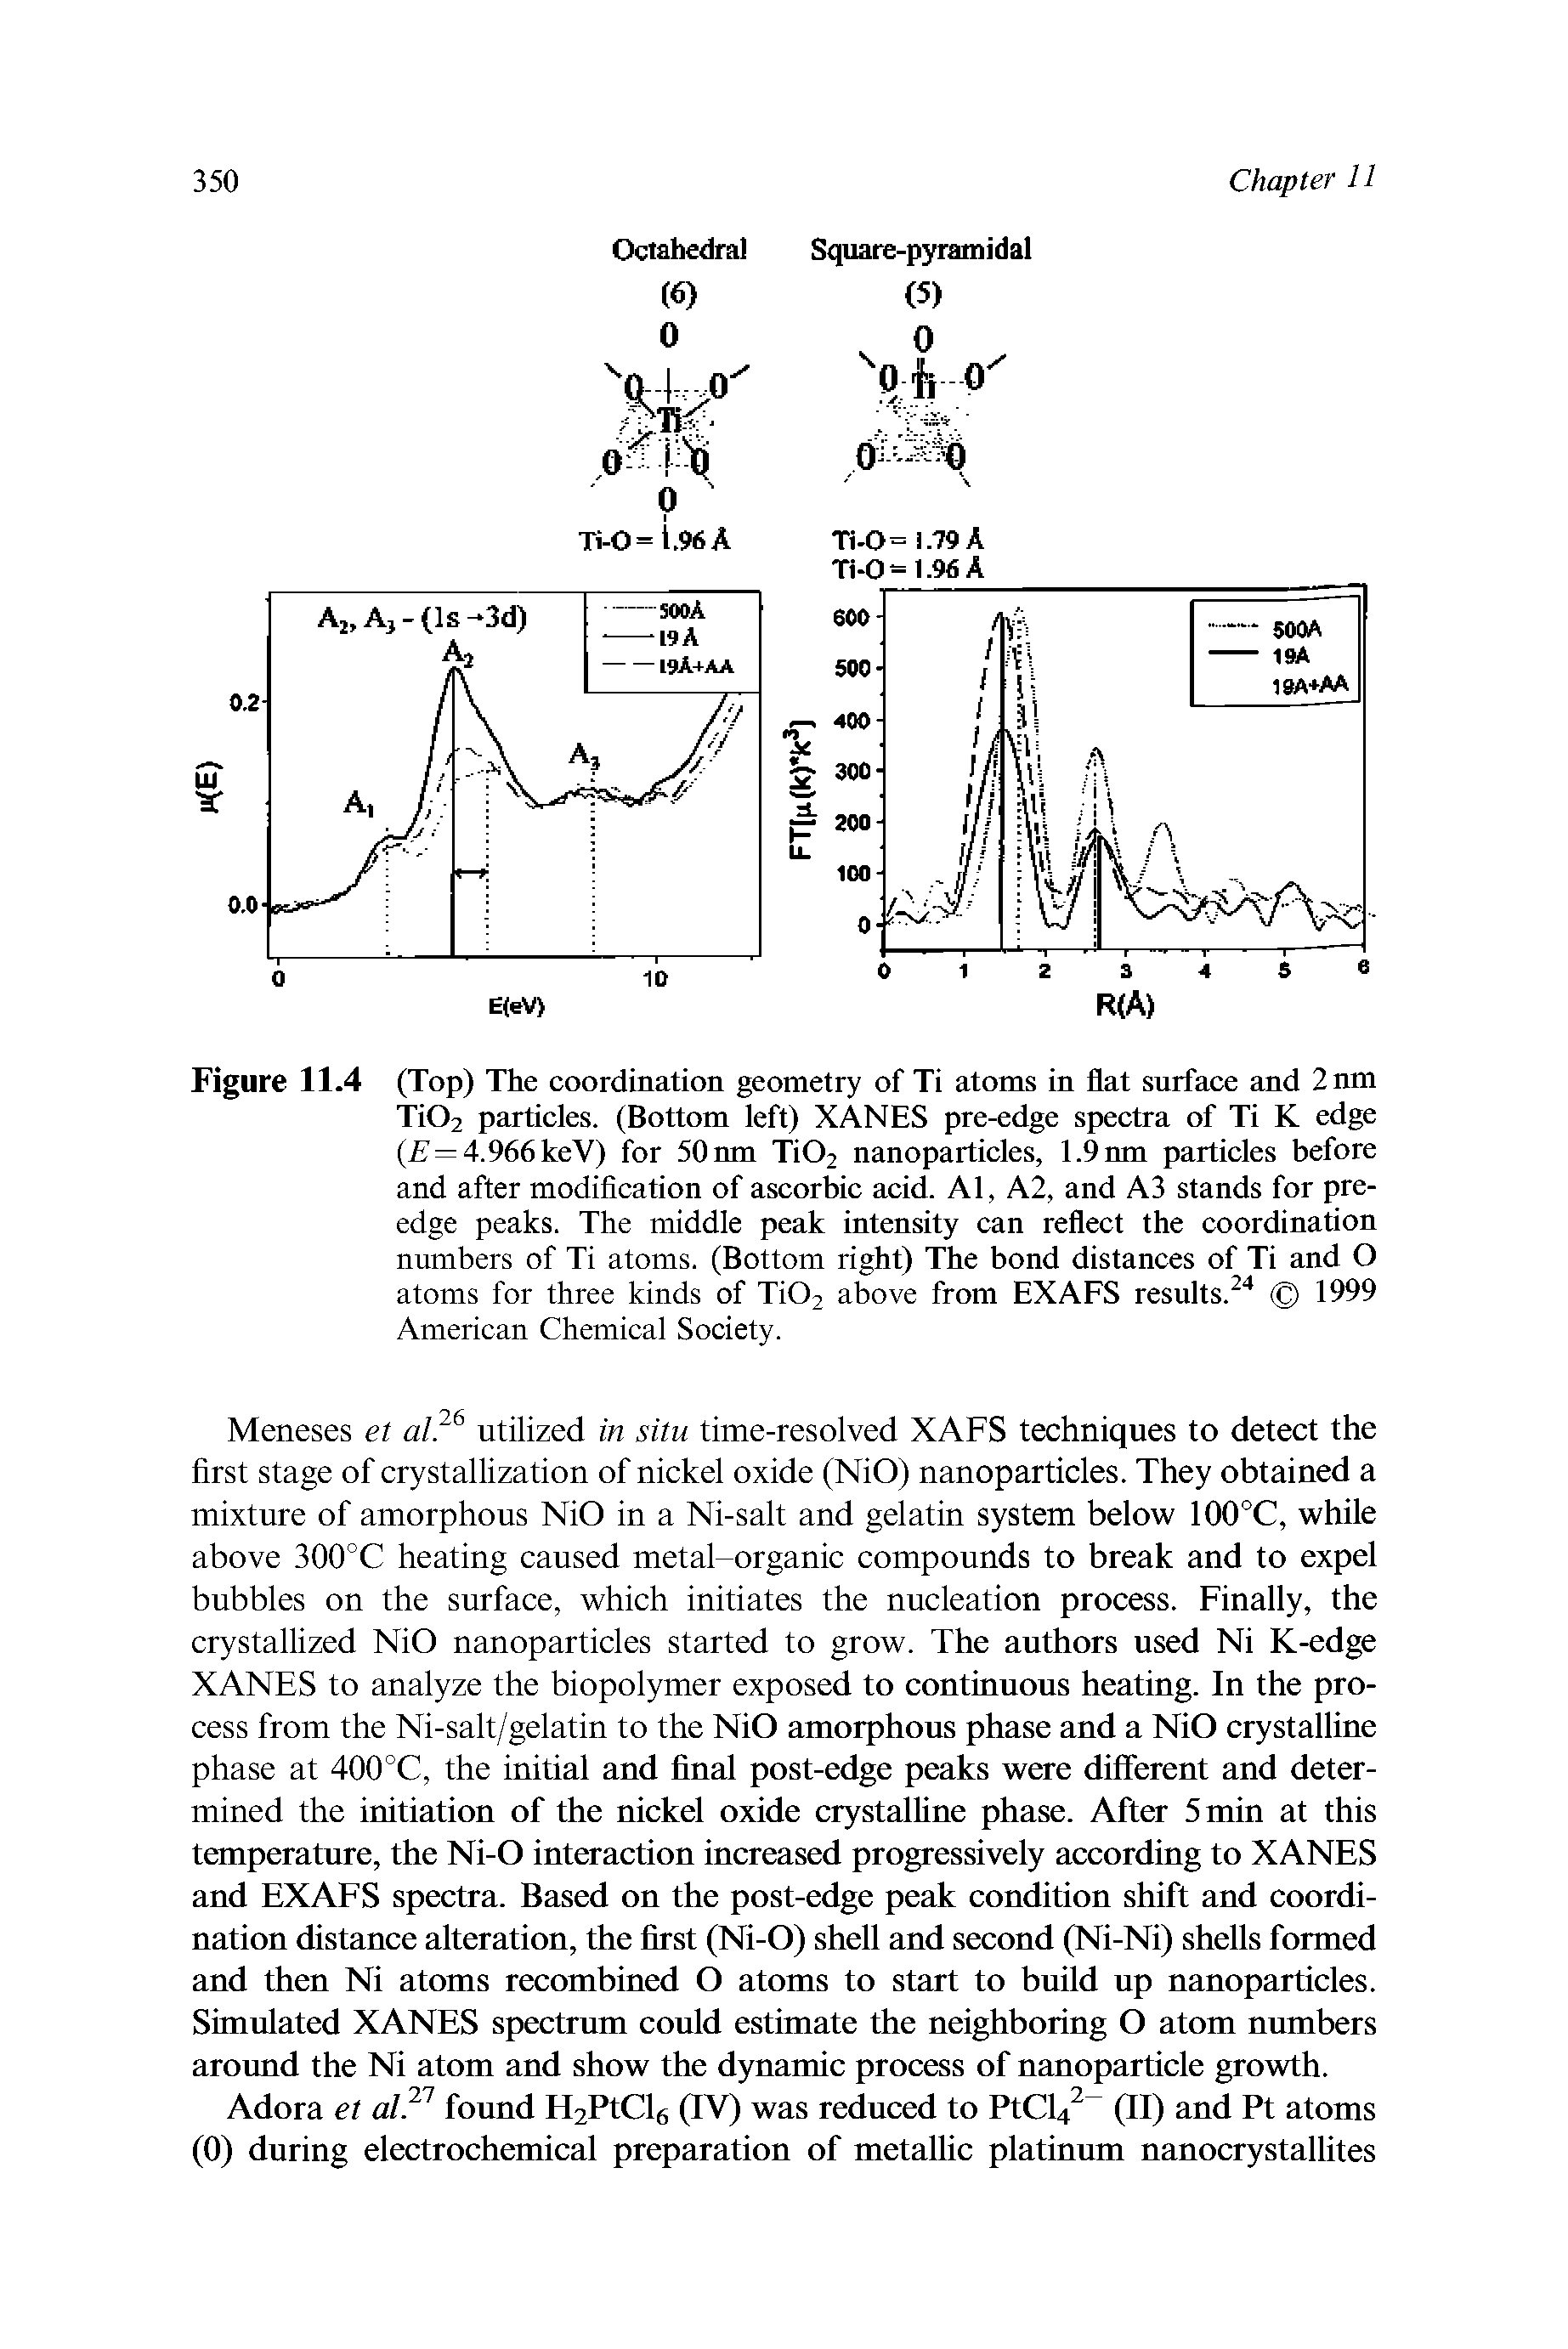 Figure 11.4 (Top) The coordination geometry of Ti atoms in flat surface and 2nm Ti02 particles. (Bottom left) XANES pre-edge spectra of Ti K edge ( = 4.966 keV) for 50 nm Ti02 nanoparticles, 1.9 nm particles before and after modification of ascorbic acid. Al, A2, and A3 stands for preedge peaks. The middle peak intensity can reflect the coordination numbers of Ti atoms. (Bottom right) The bond distances of Ti and O atoms for three kinds of Ti02 above from EXAFS results. 1999 American Chemical Society.